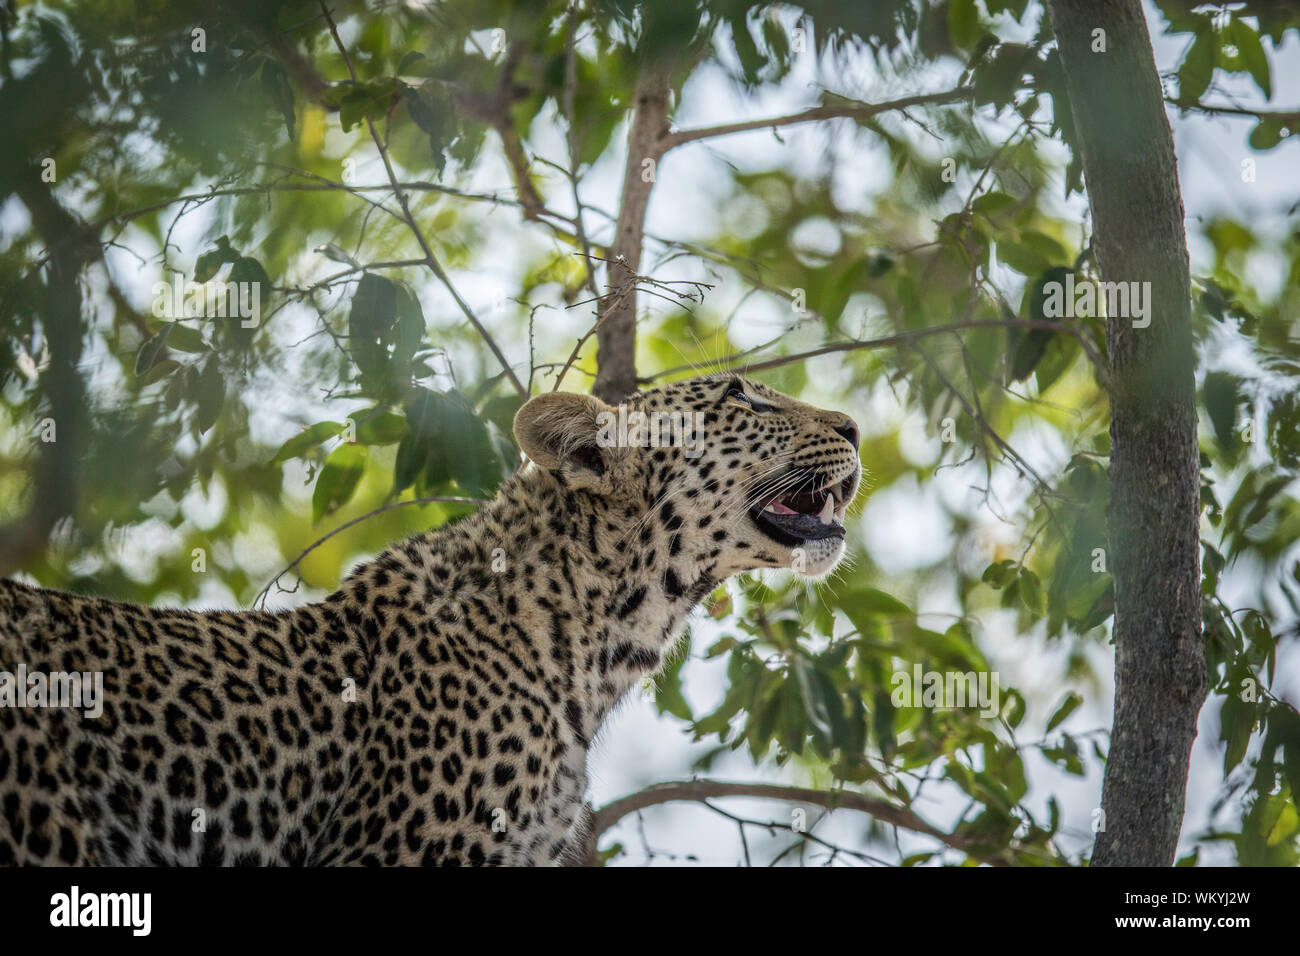 Low Angle View Of Cheetah Against Trees Stock Photo